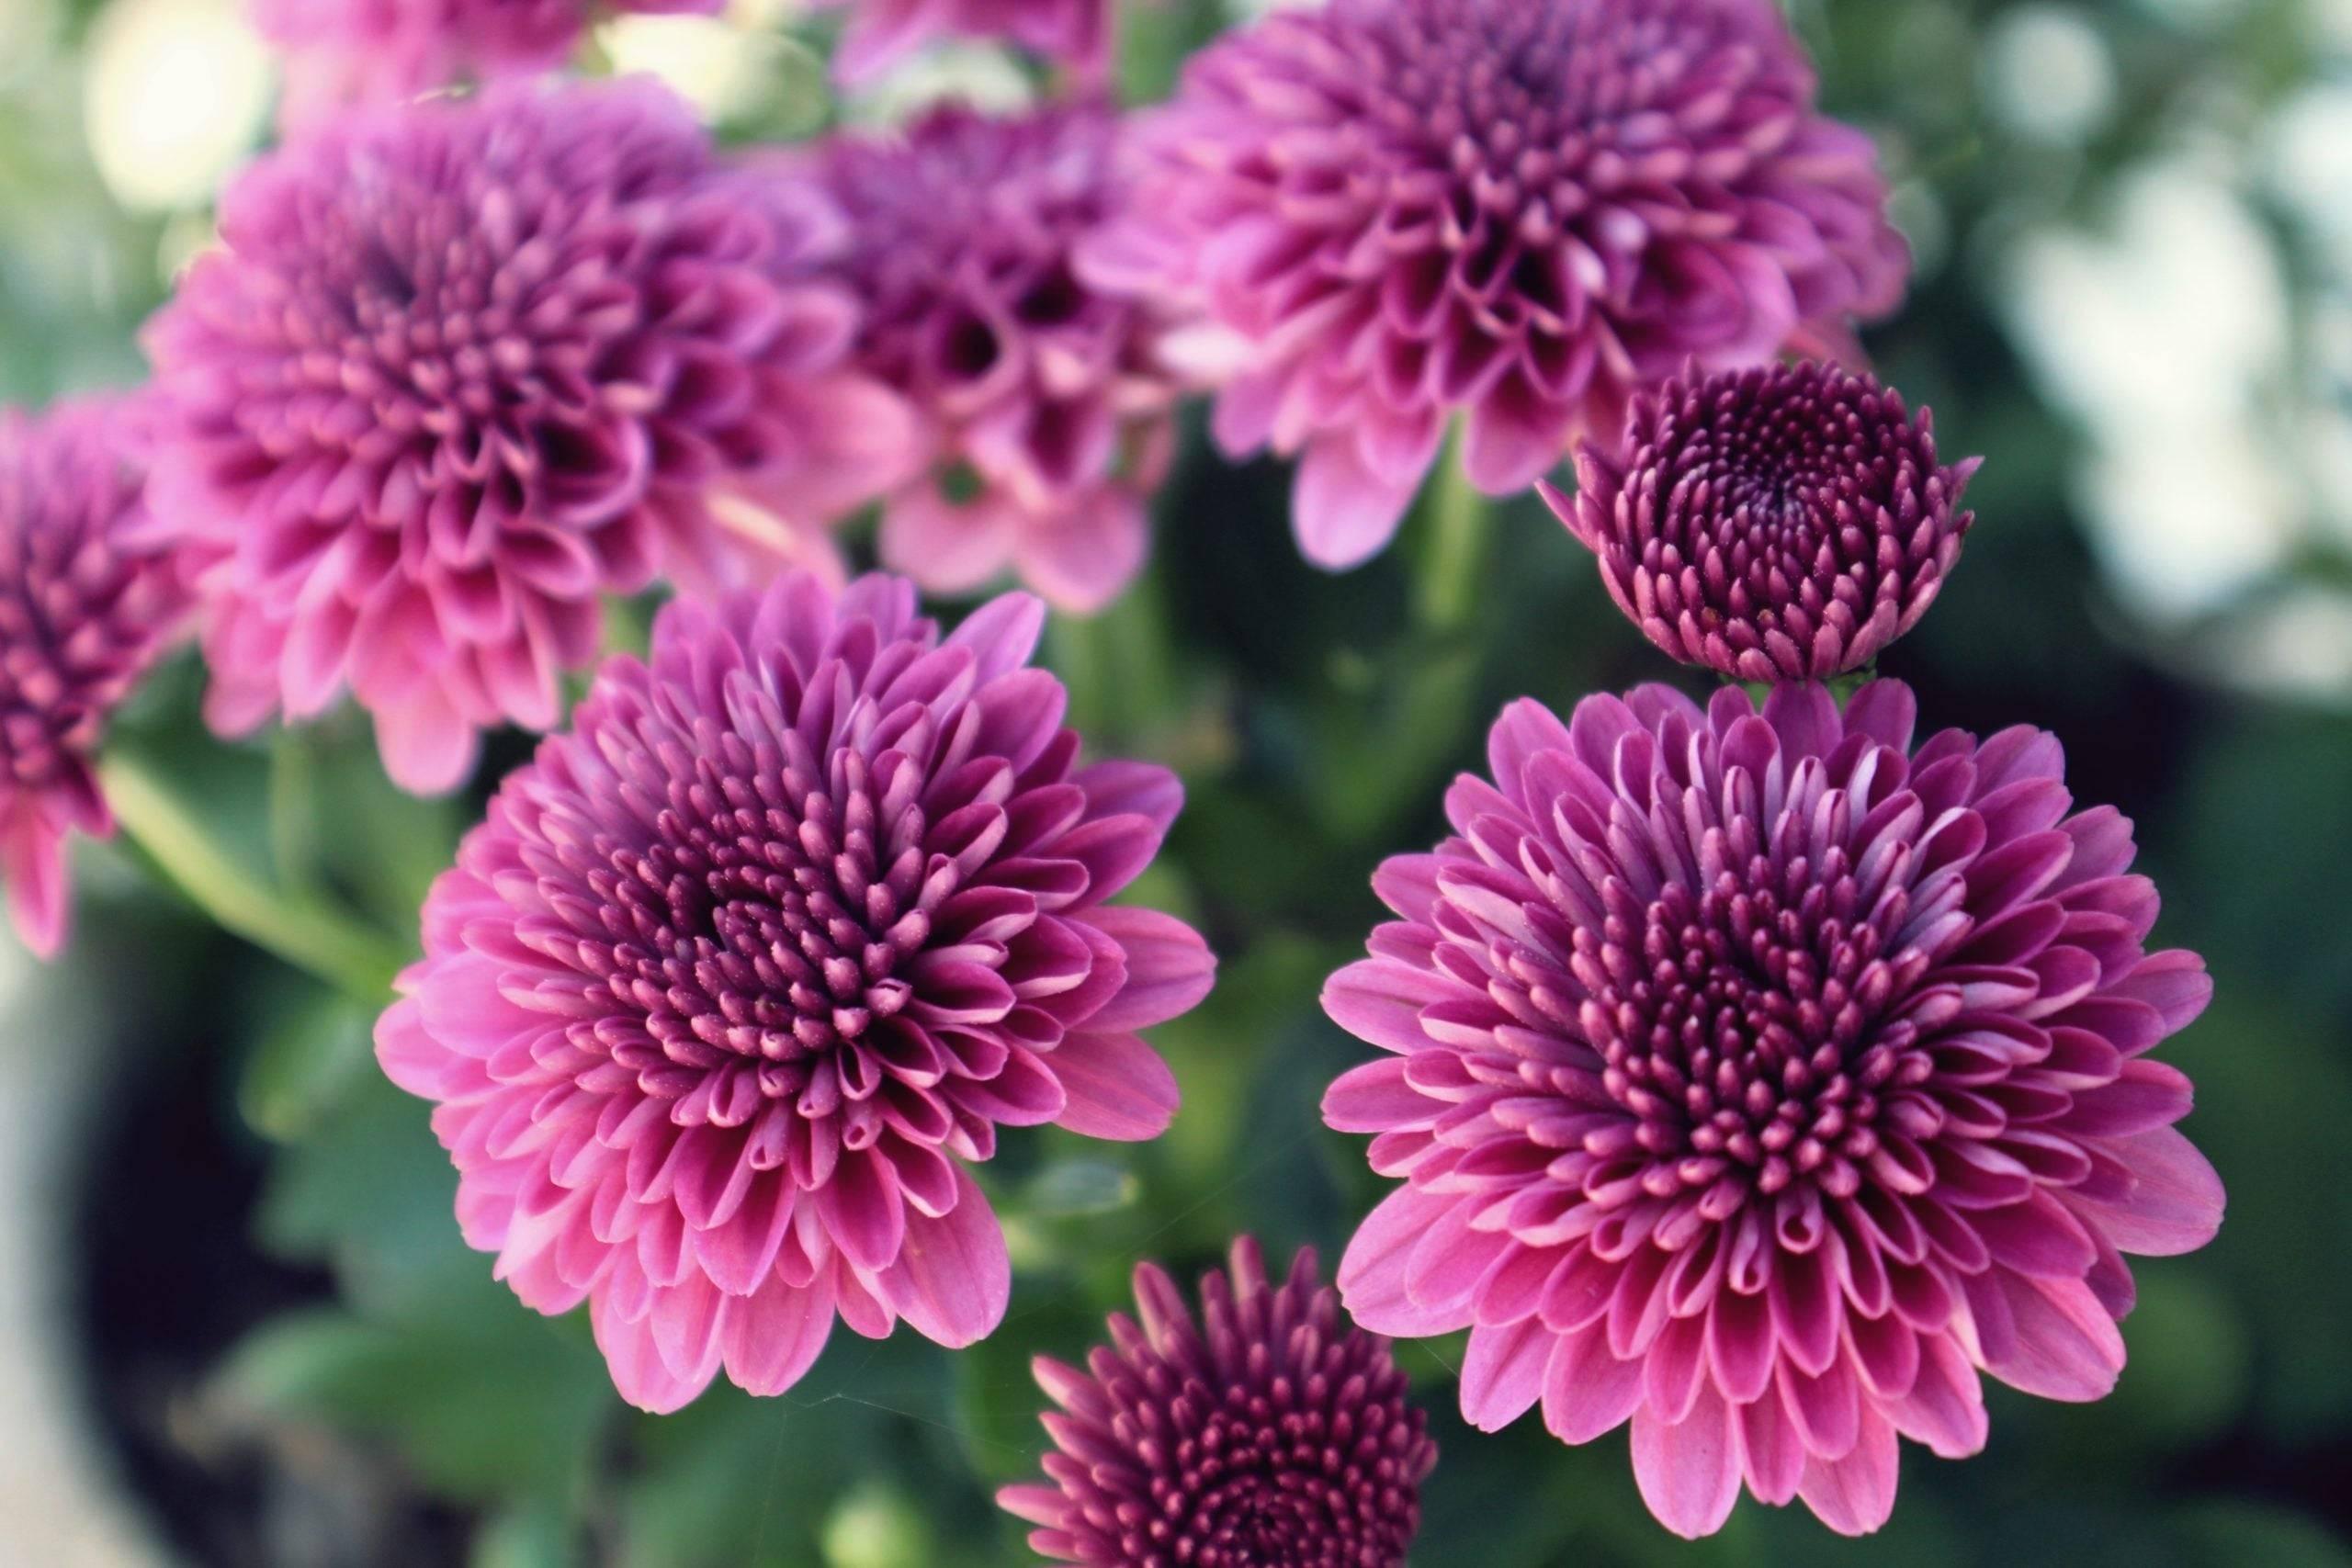 Chrysanthemum Flowers Information and Facts